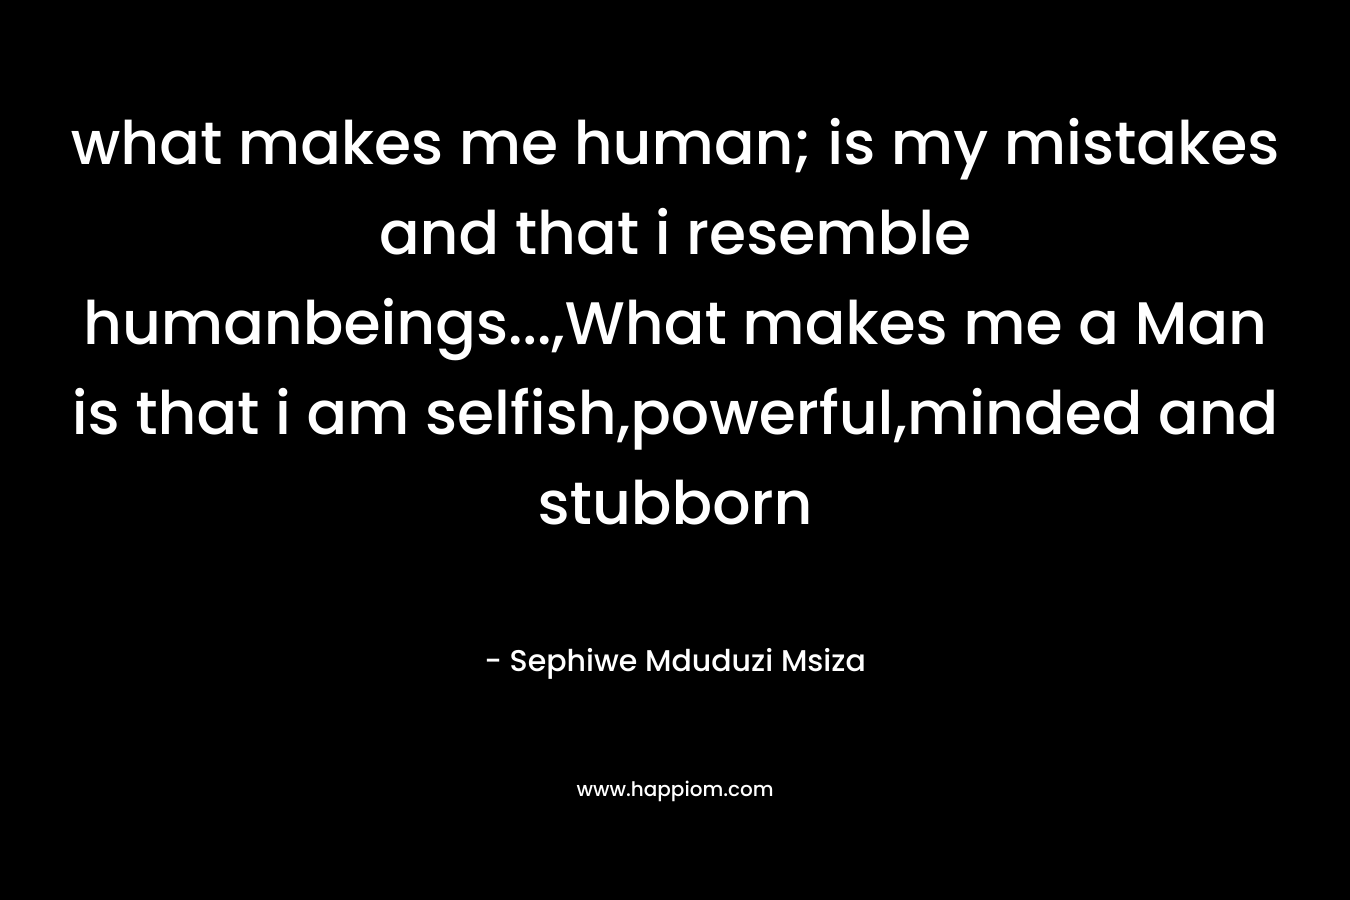 what makes me human; is my mistakes and that i resemble humanbeings…,What makes me a Man is that i am selfish,powerful,minded and stubborn – Sephiwe Mduduzi Msiza